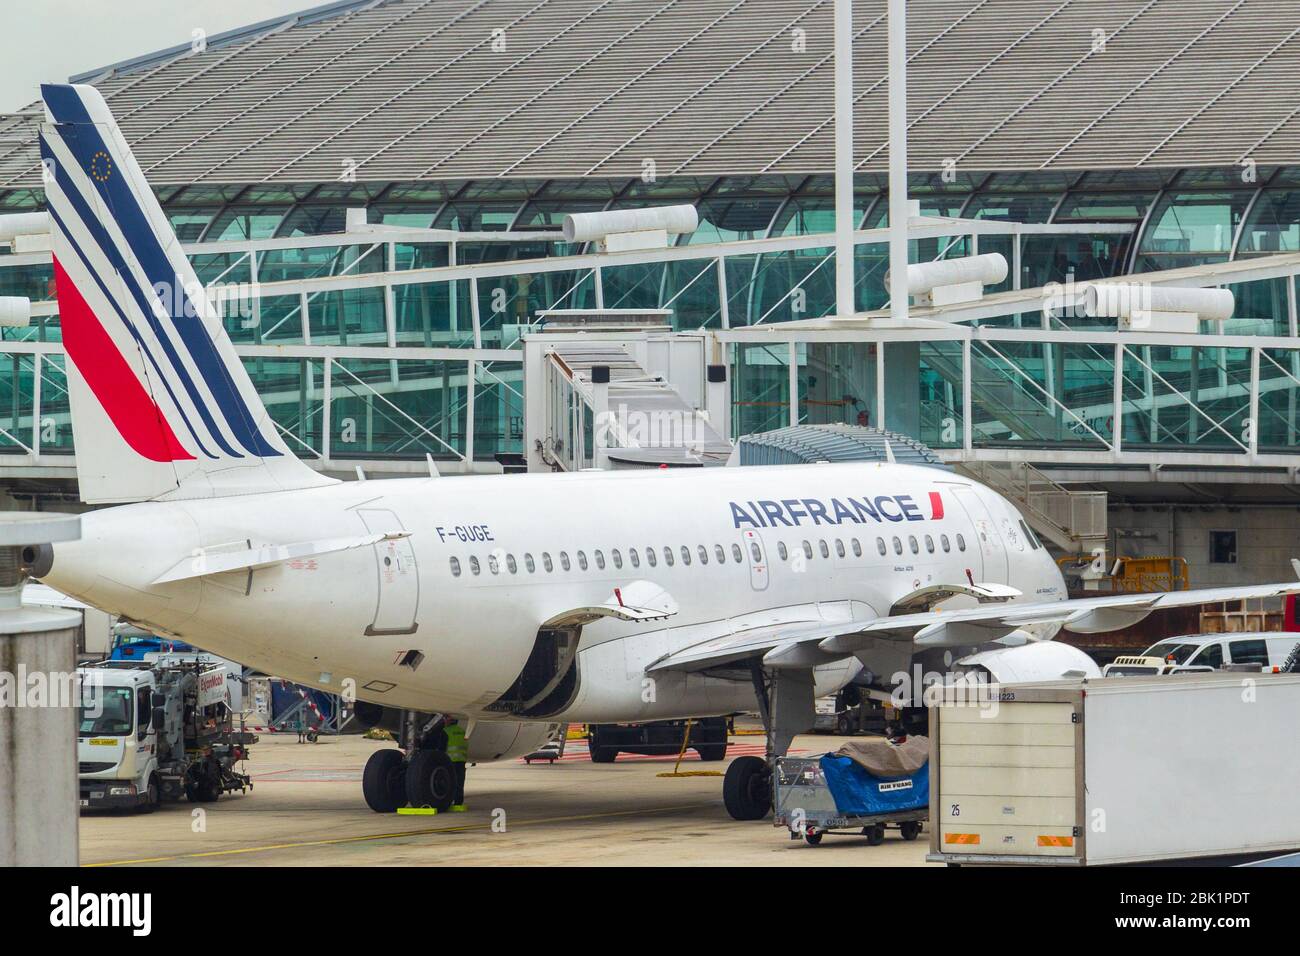 PARIS, FRANCE -1 March 2020- View of airplanes at the Roissy Charles de Gaulle International Airport CDG near Paris, France. During pandemic no flies. Stock Photo